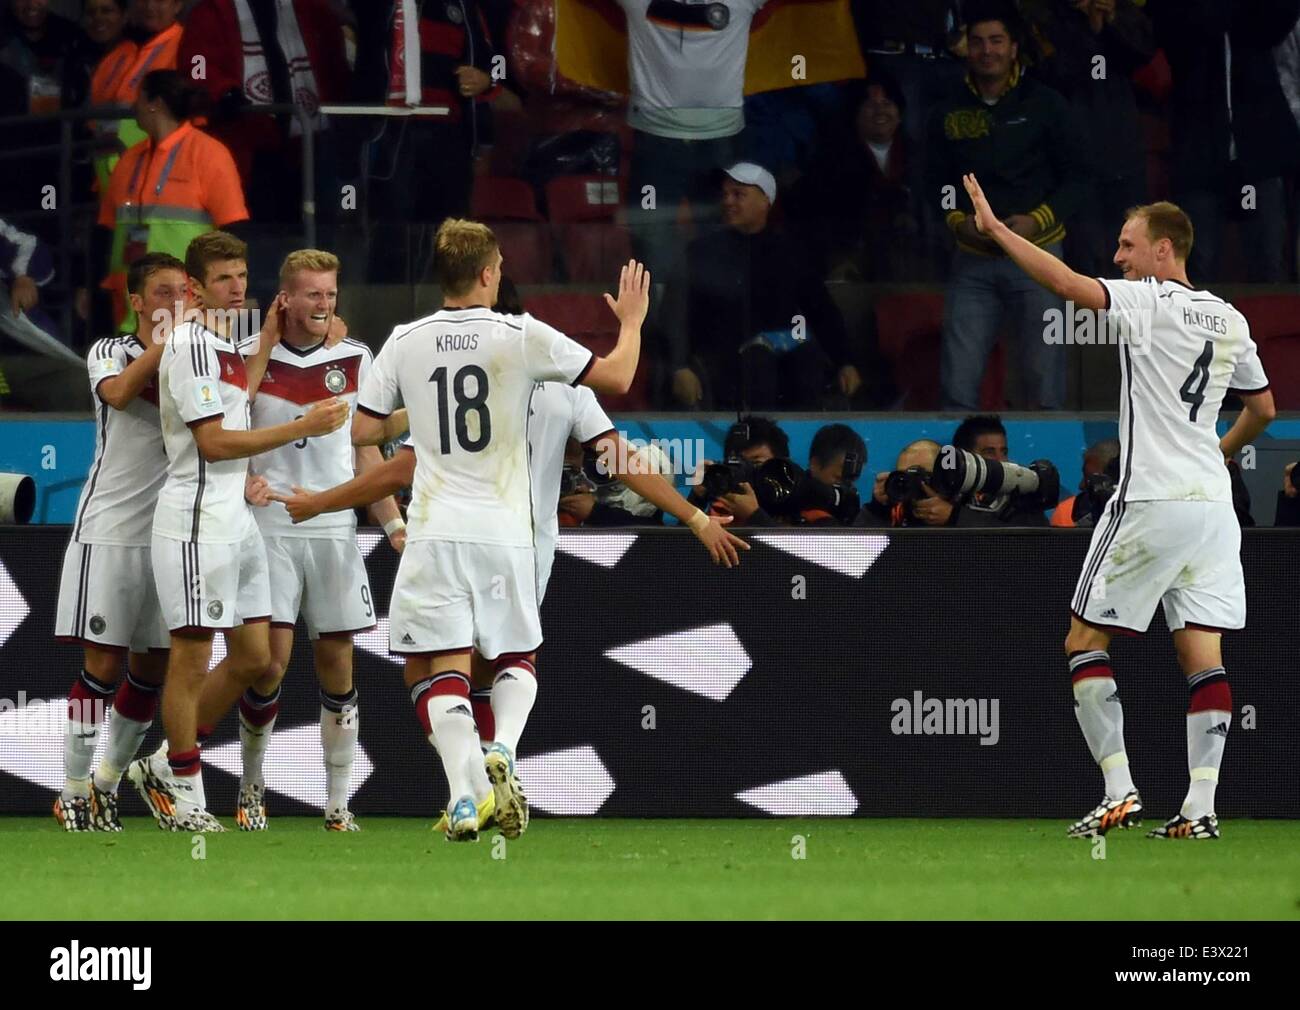 Porto Alegre, Brazil. 30th June, 2014. Germany's Andre Schurrle (3rd L) celebrates a goal during the extra time of a Round of 16 match between Germany and Algeria of 2014 FIFA World Cup at the Estadio Beira-Rio Stadium in Porto Alegre, Brazil, on June 30, 2014. Credit:  Li Ga/Xinhua/Alamy Live News Stock Photo